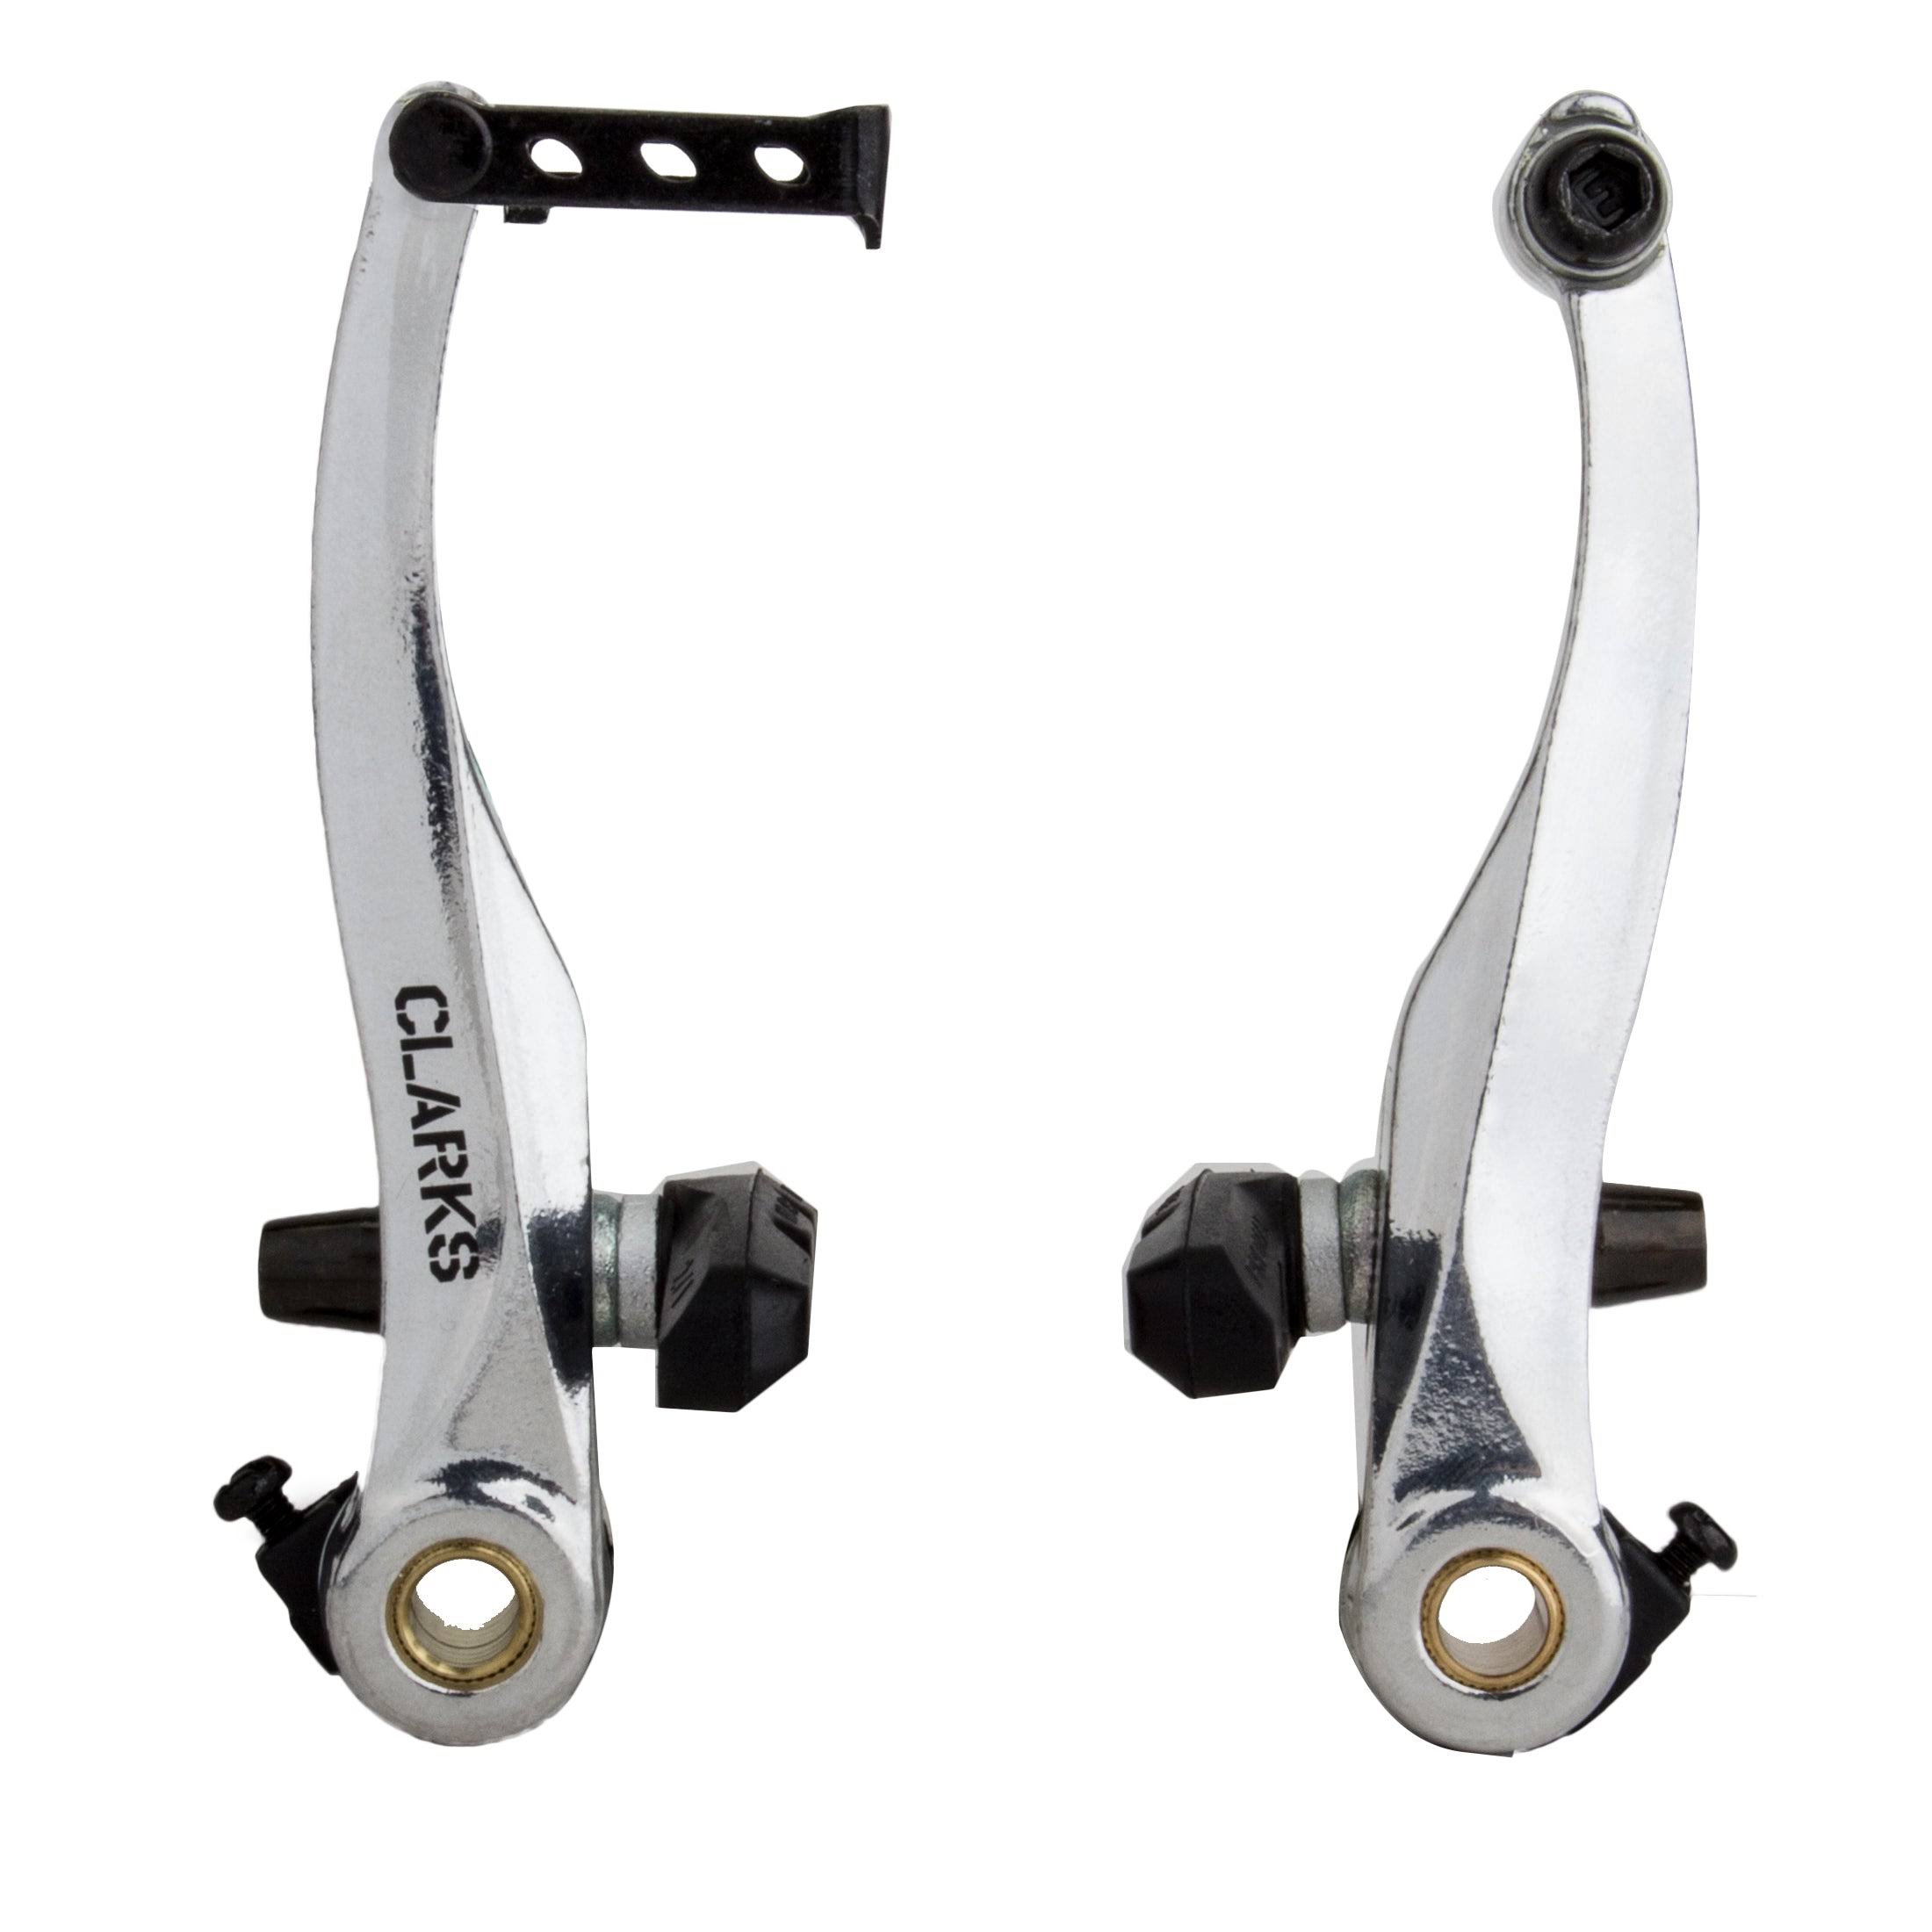 Clarks V-Brake Front and Rear Calipers - 110mm